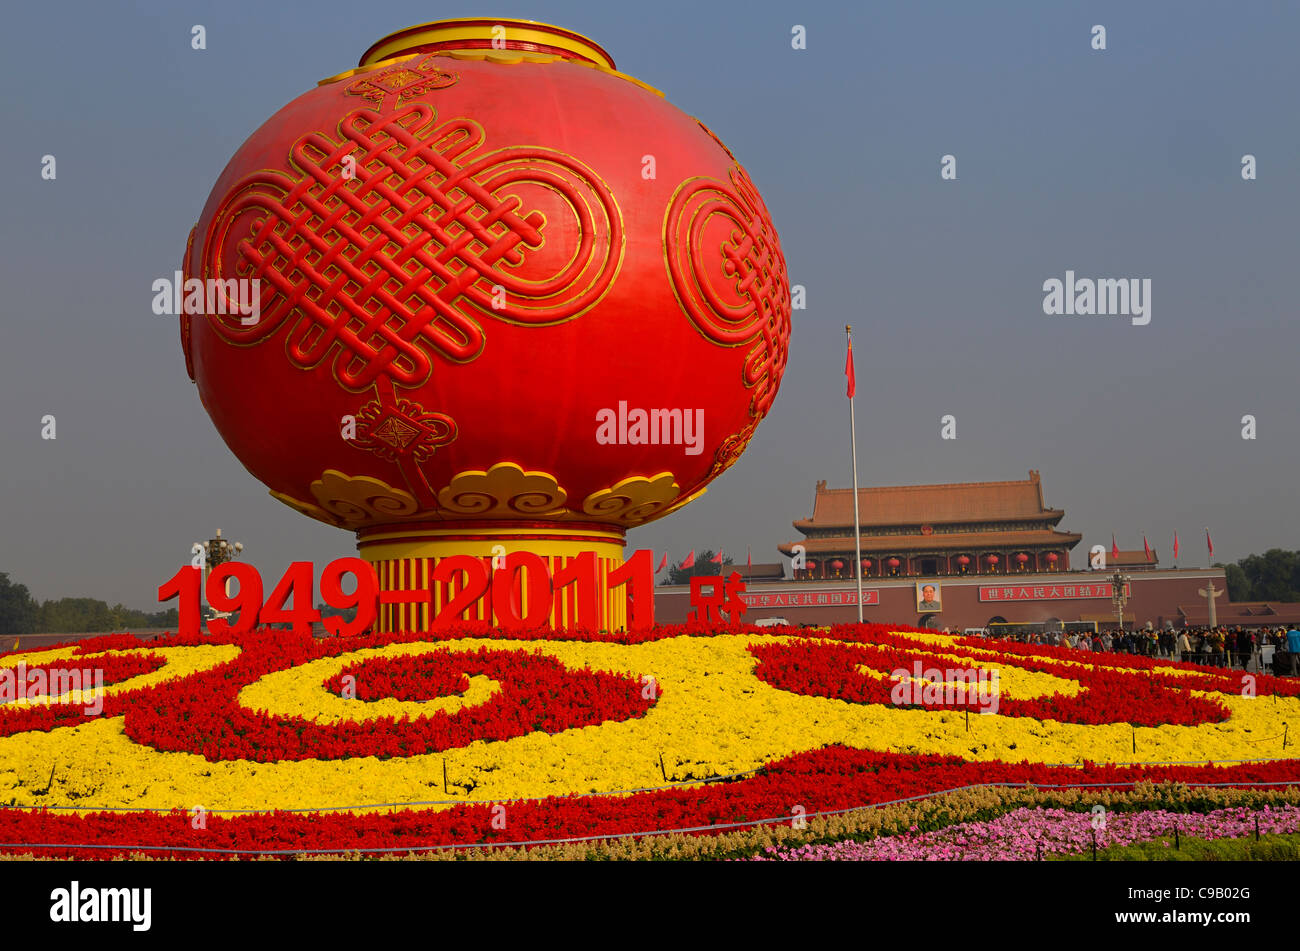 Special globe and flower decorations for 2011 National Day celebrations in Tiananmen Square Beijing Peoples Republic of China Stock Photo